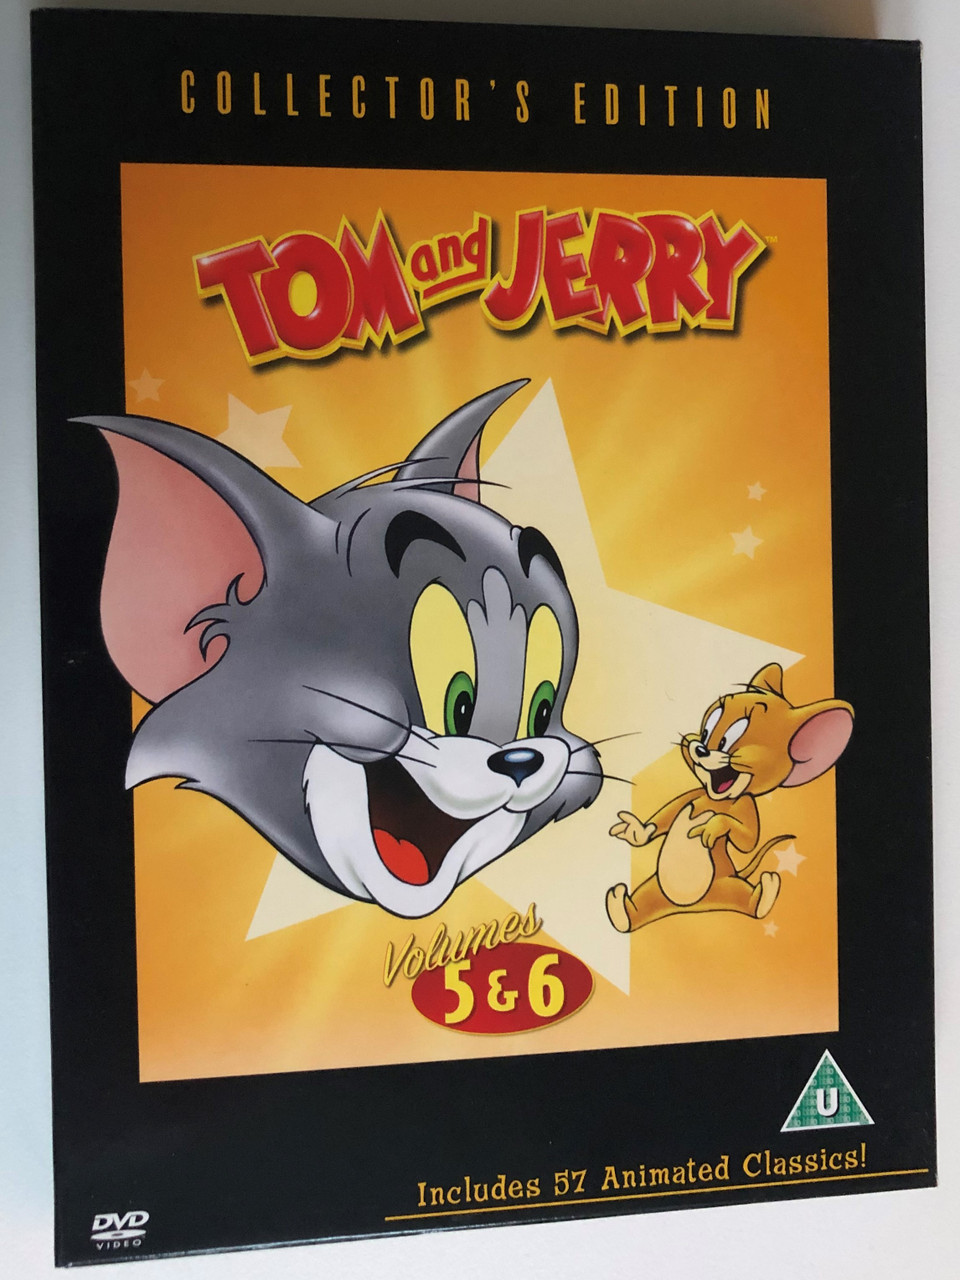 Tom and Jerry - Volumes 5 & 6 DVD Collector's Edition / Directed by William  Hanna, Joseph Barbera / Includes 57 Animated Classics! - bibleinmylanguage